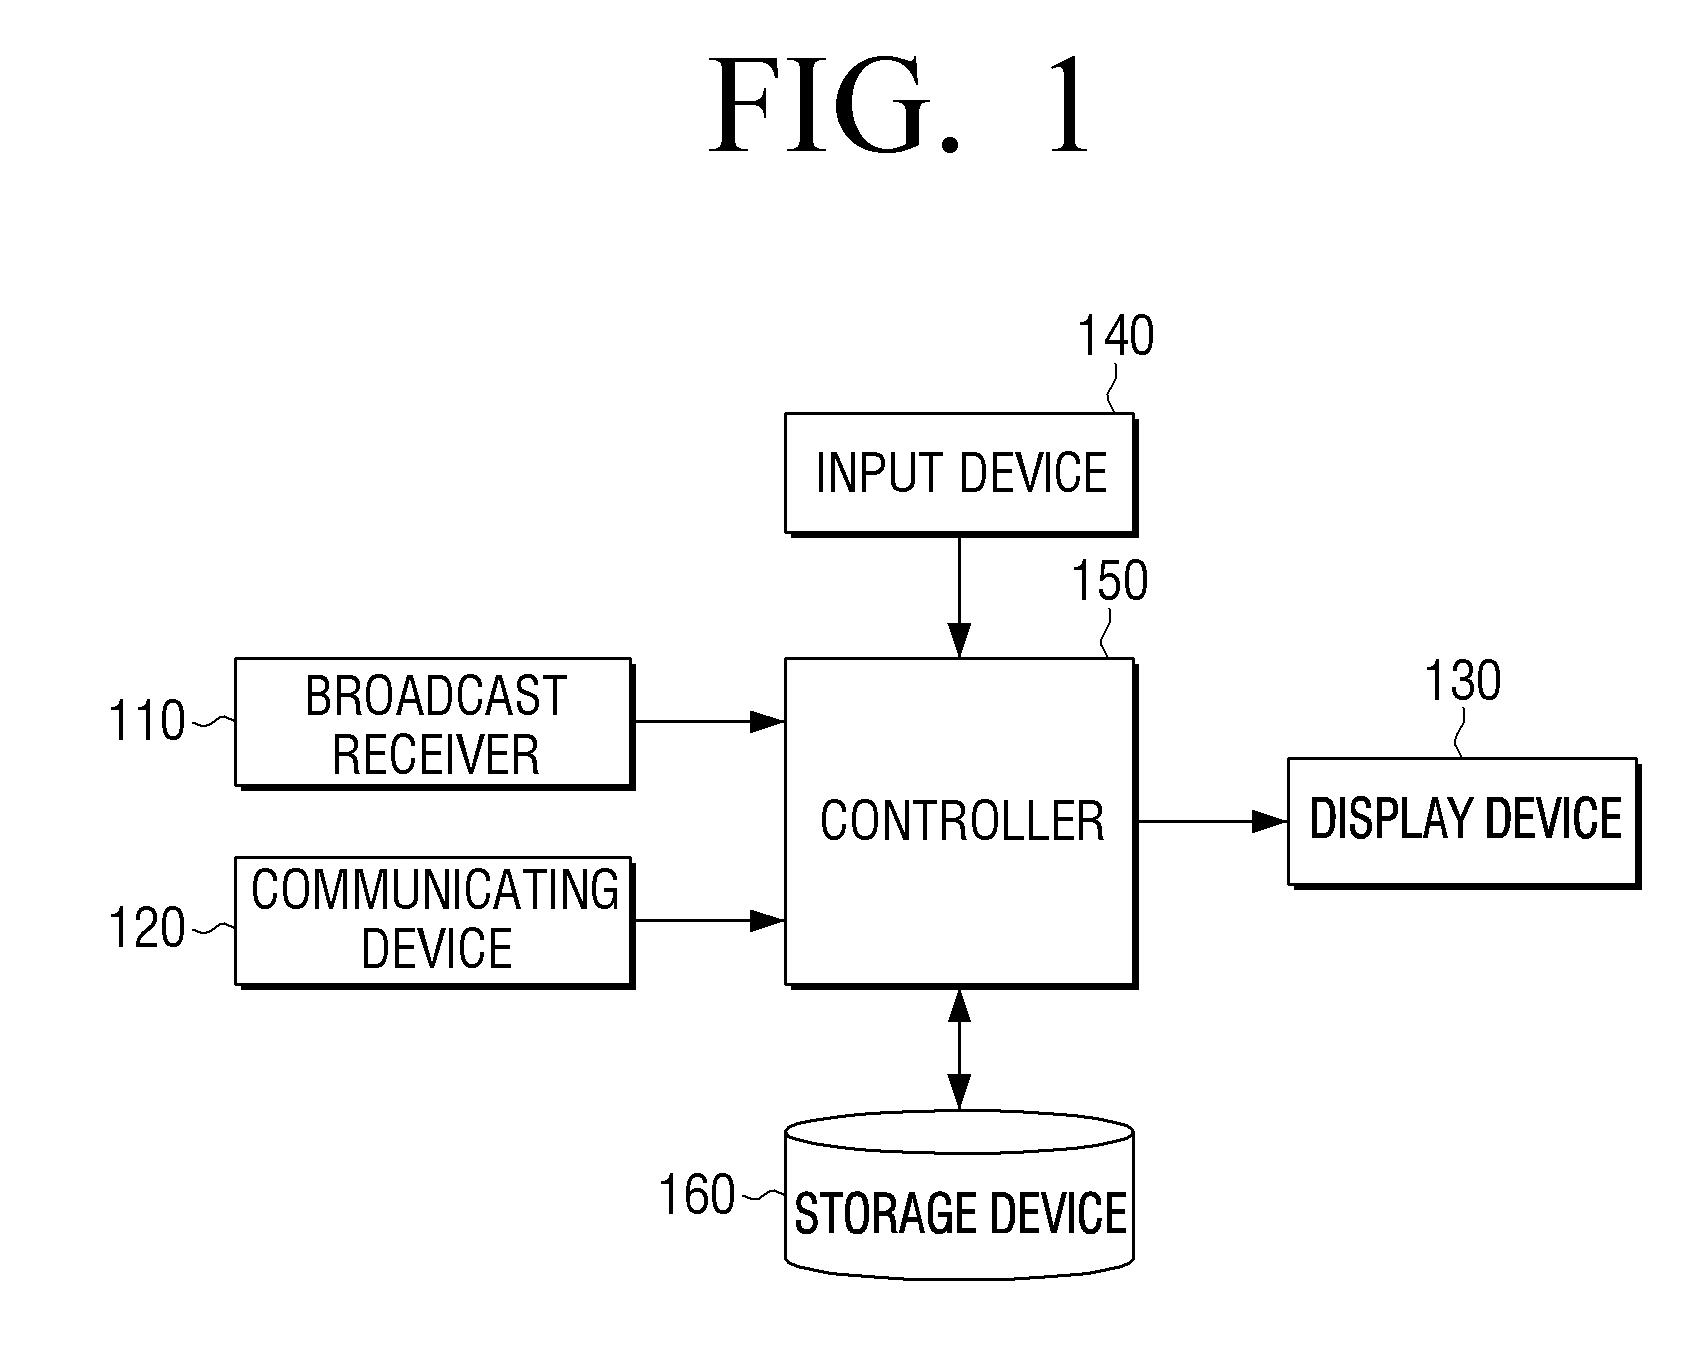 Apparatus and method for displaying